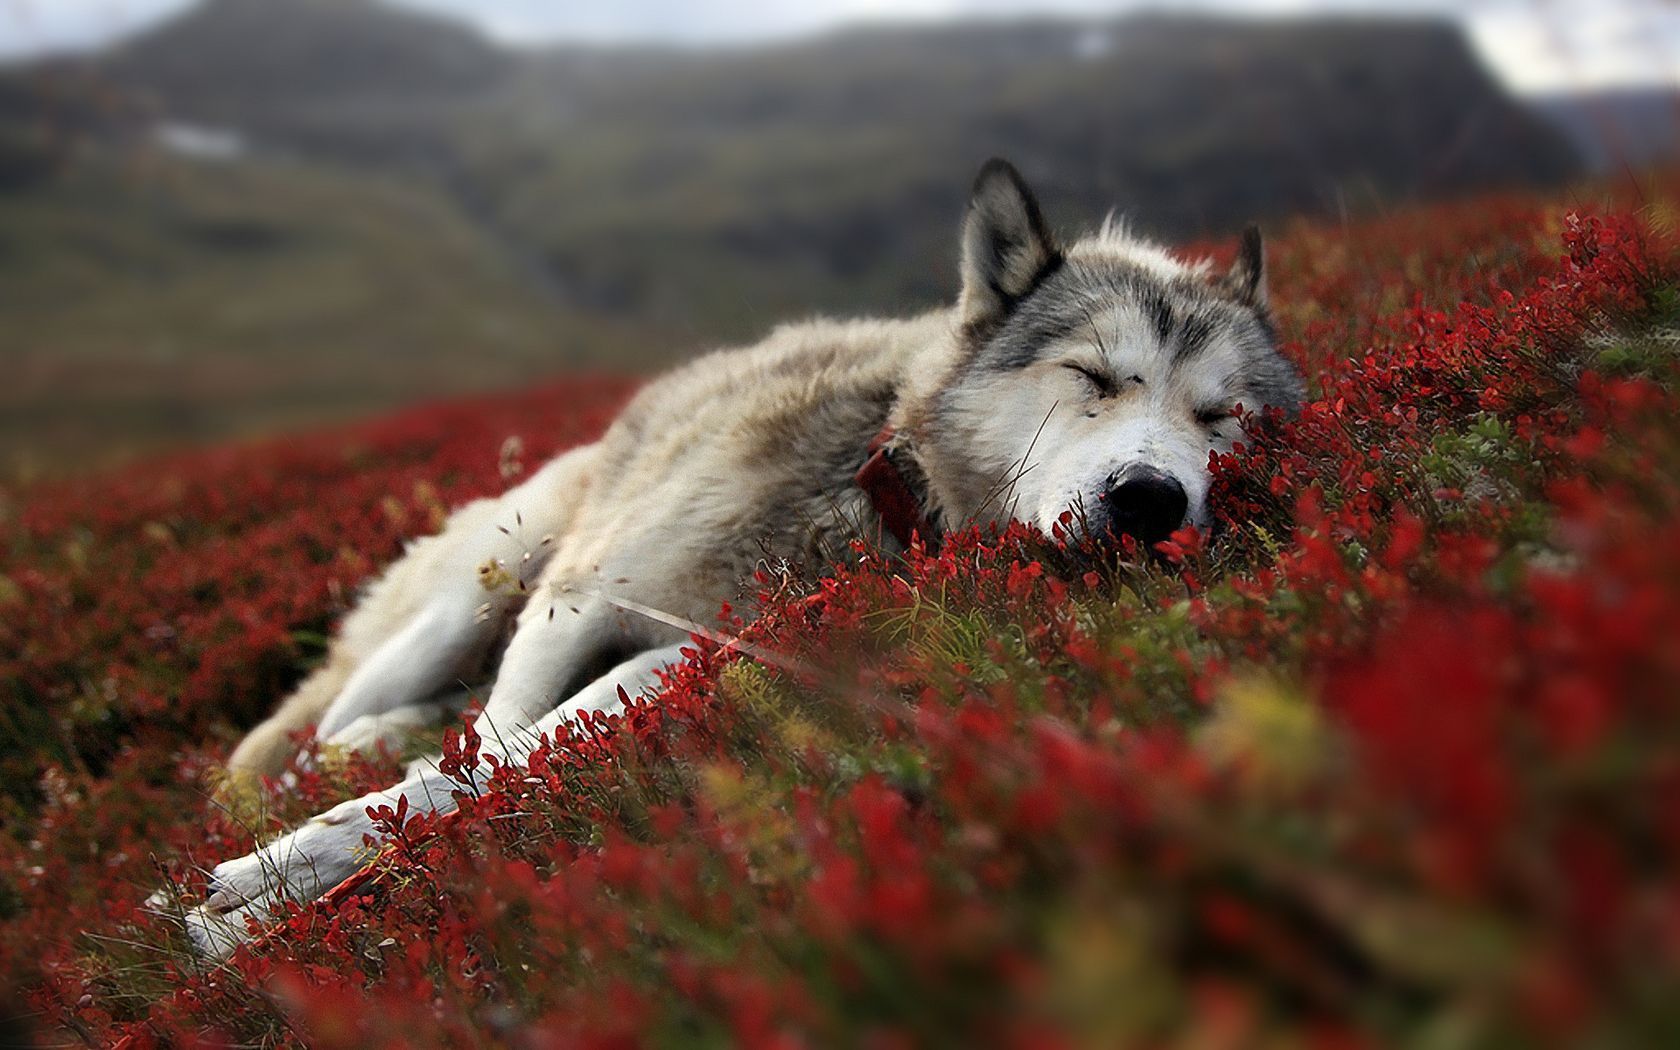 A sleeping dog in a field of red flowers. - Wolf